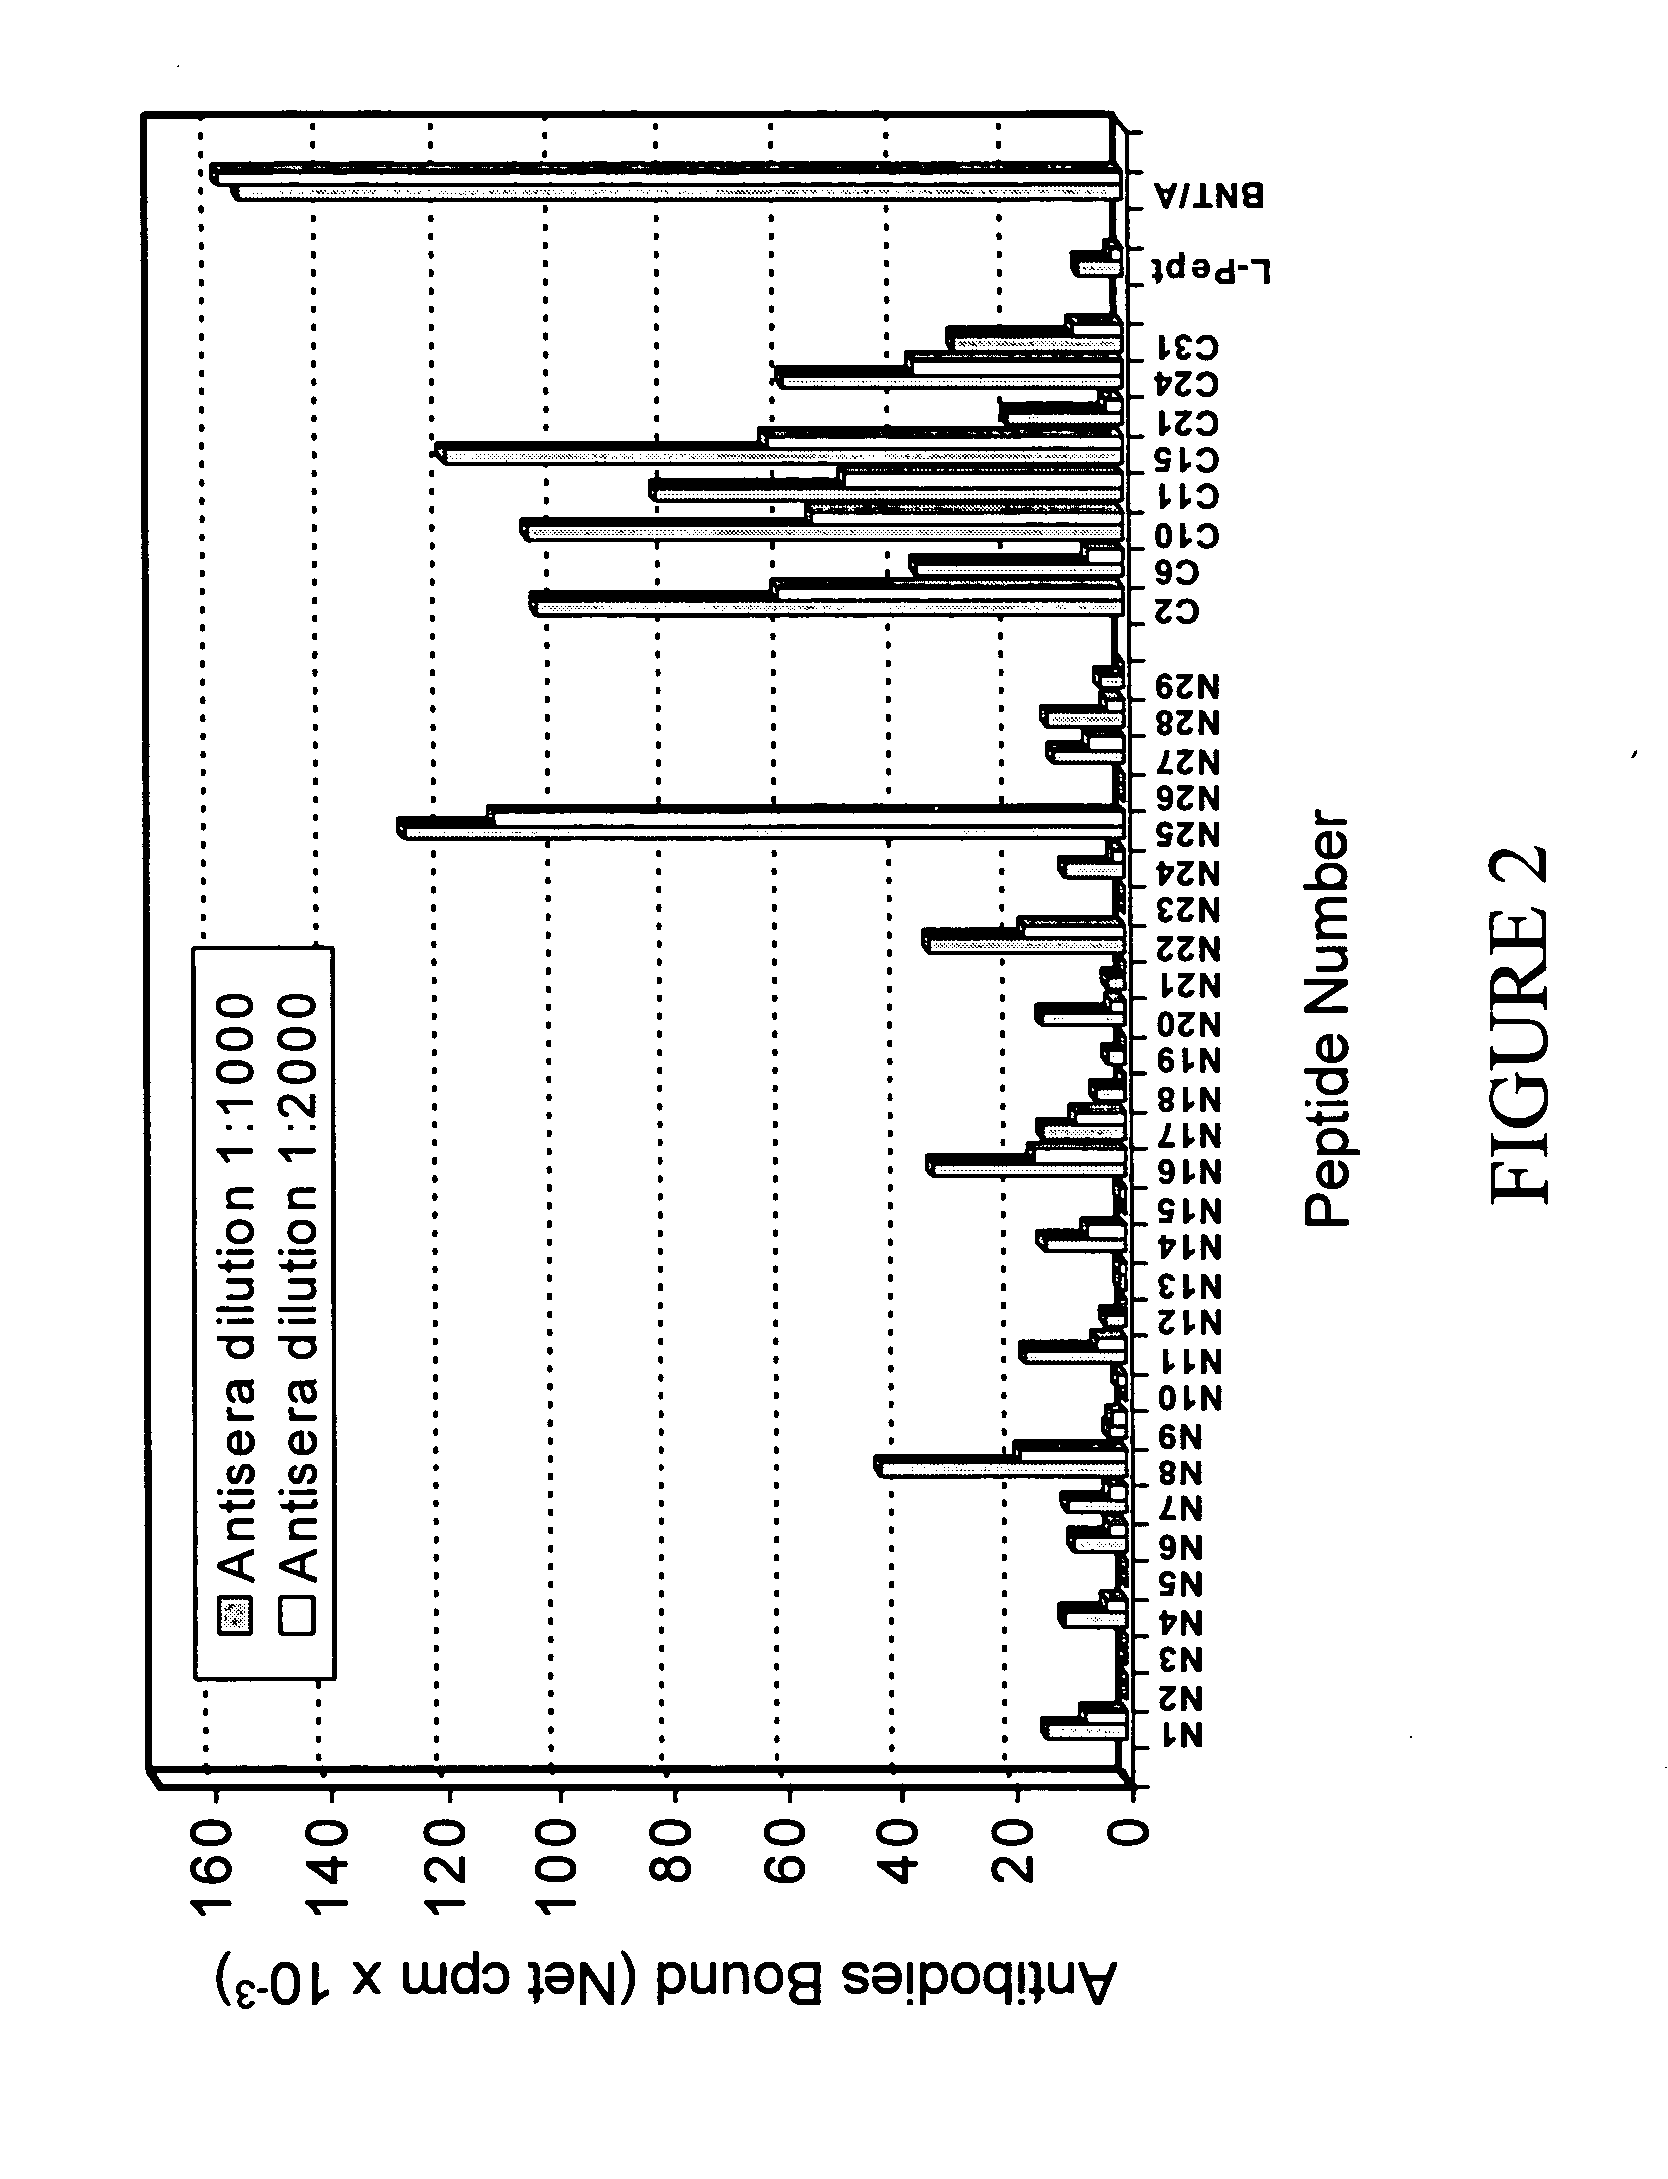 Botulinum toxin a peptides and methods of predicting and reducing immunoresistance to botulinum toxin therapy